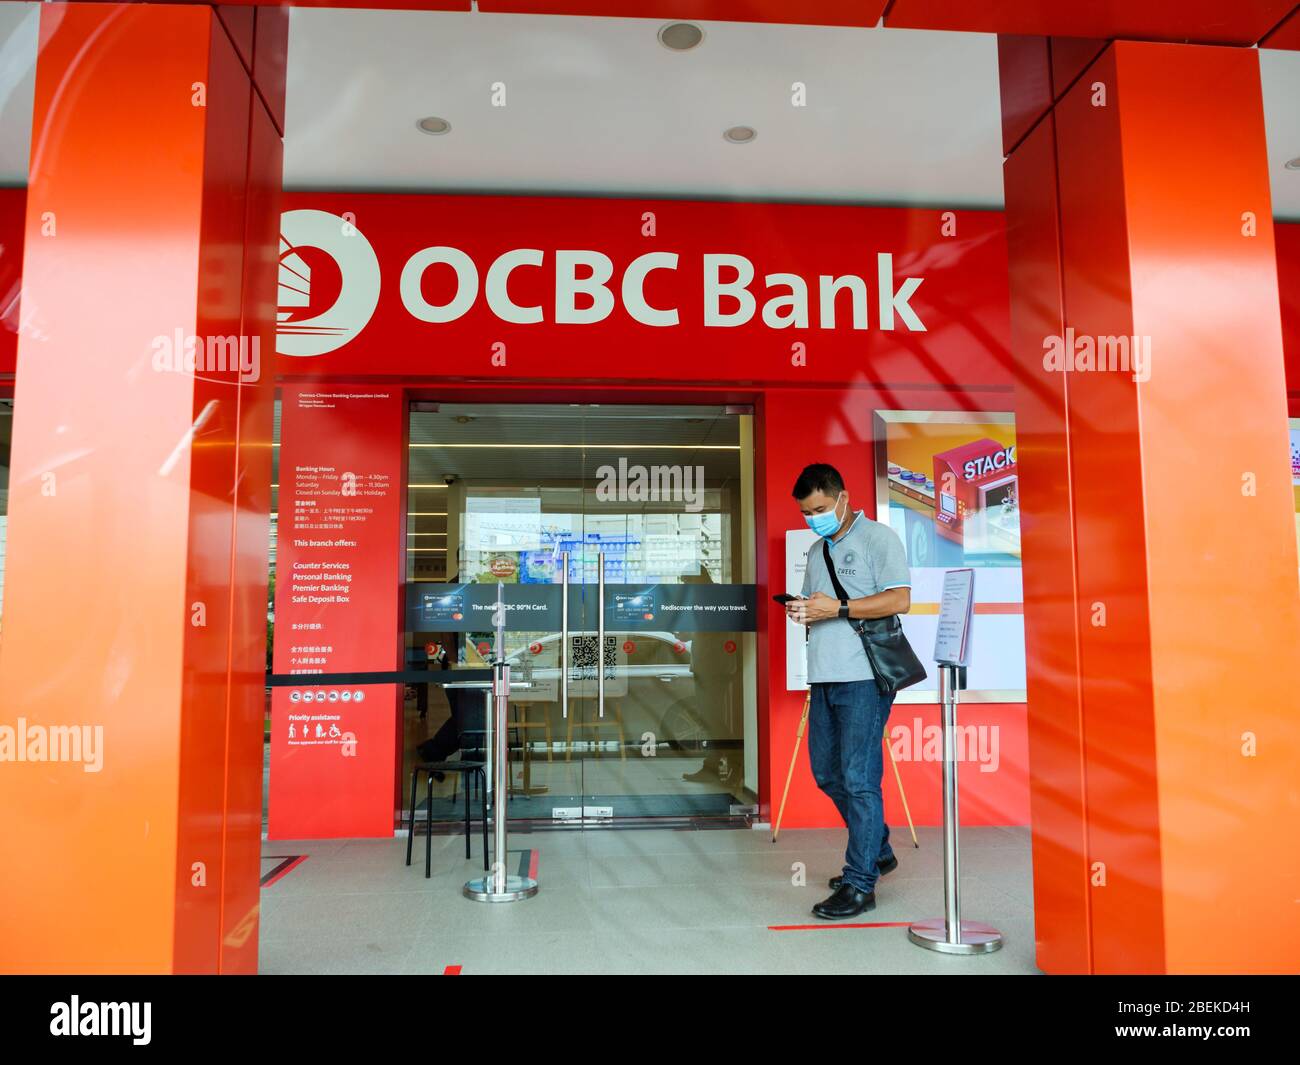 SINGAPORE – 9 APR 2020 – Man wearing face mask outside the entrance of an OCBC Bank branch. The OCBC logo is clearly visible. Stock Photo